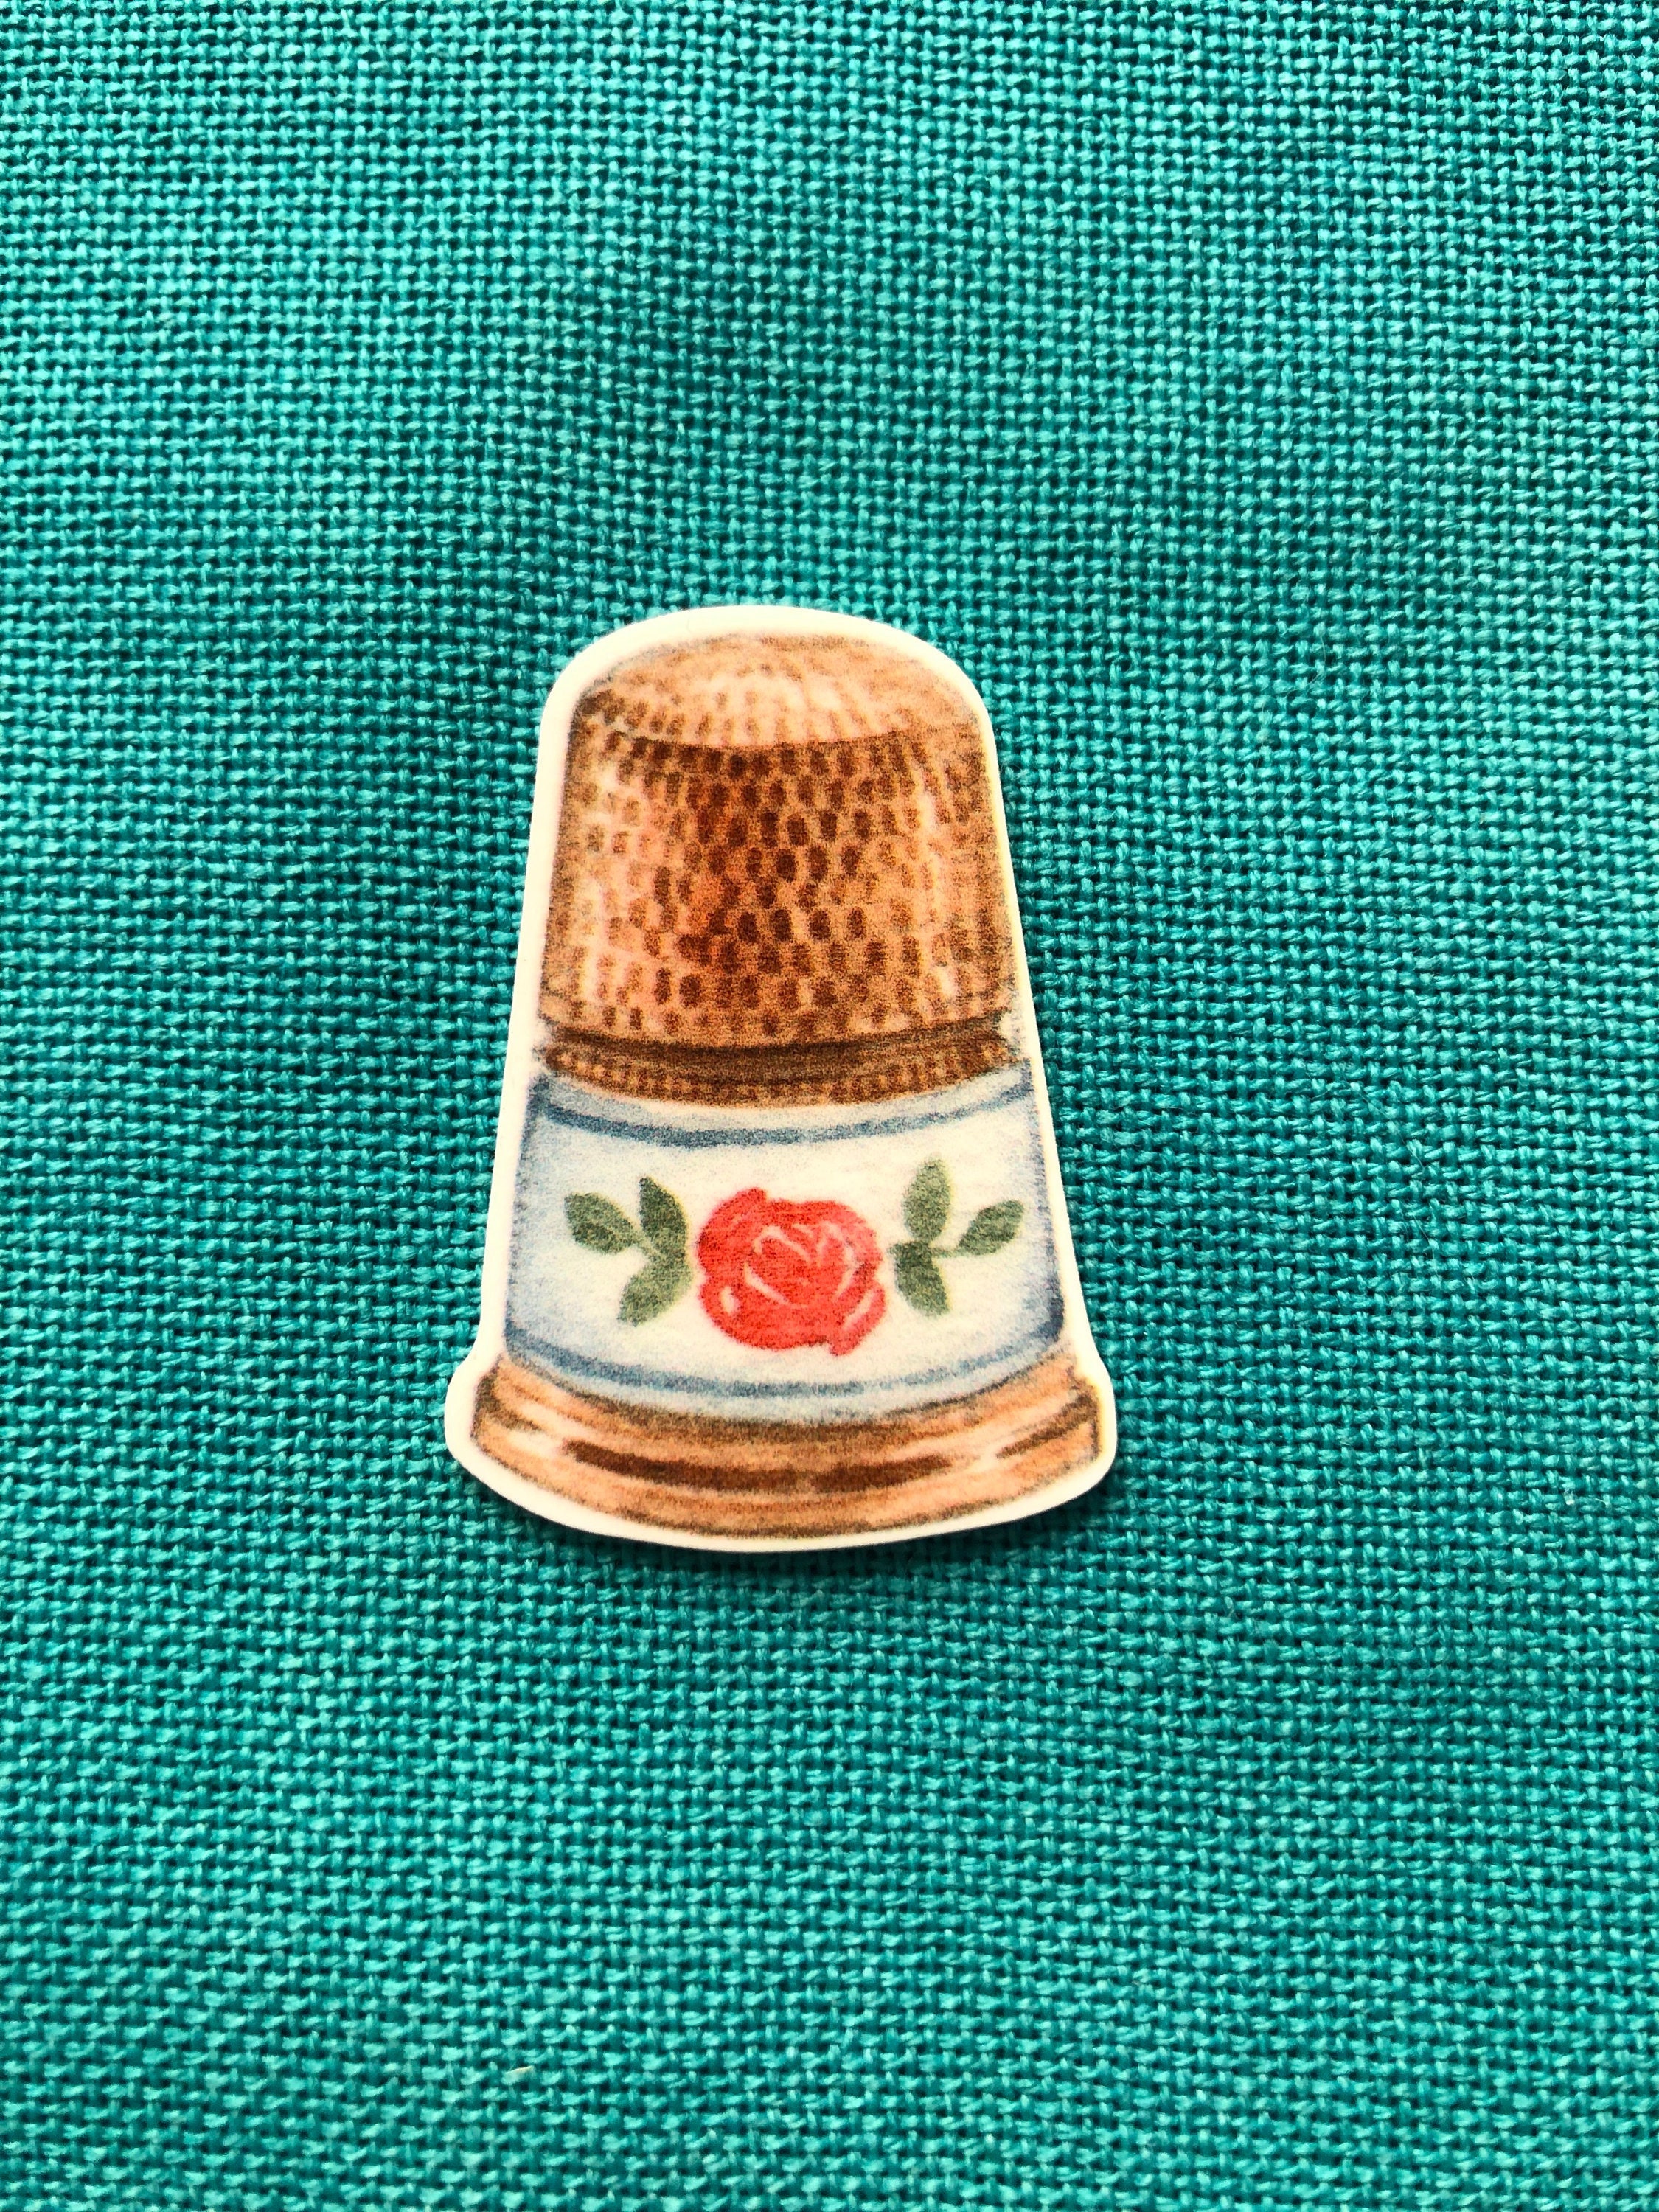 DIY Silicone Thimble Anti-stick Finger Cover Thimble Hand Cross-stitch  Sewing Accessories Anti-slip Finger Protection Thimble 